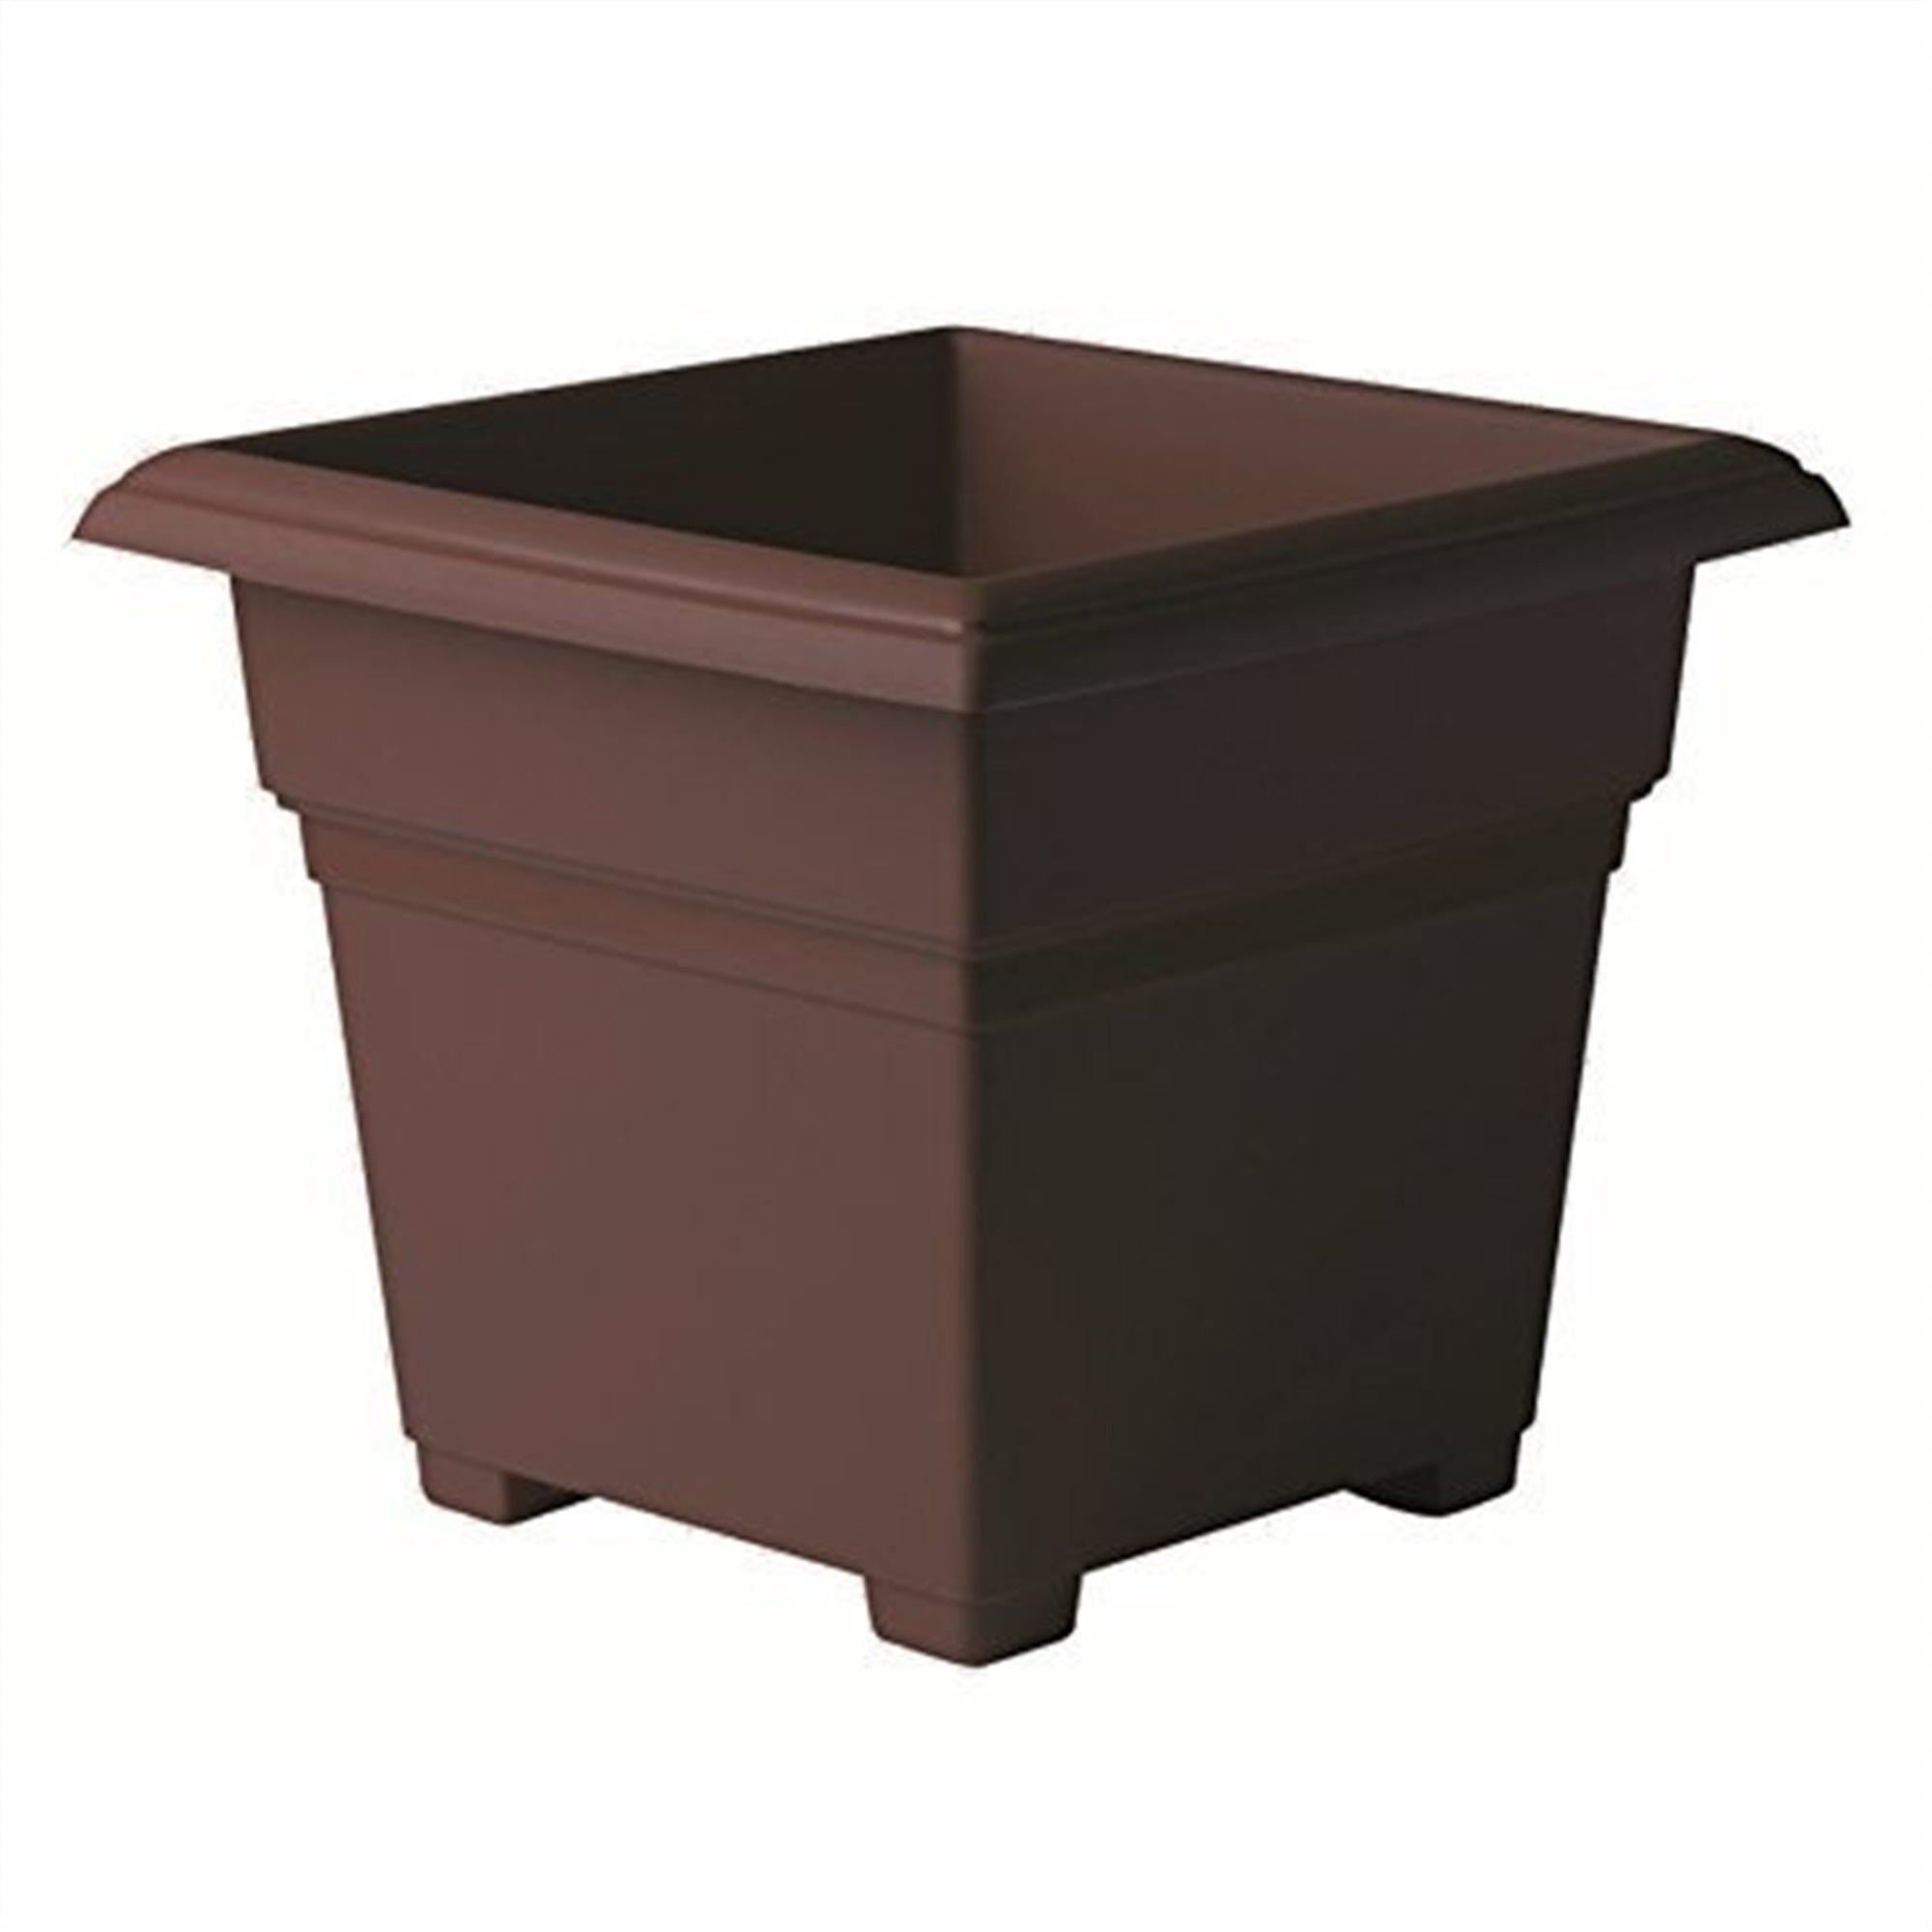 Novelty Countryside Square Tub Planter, Brown, 14 Inch